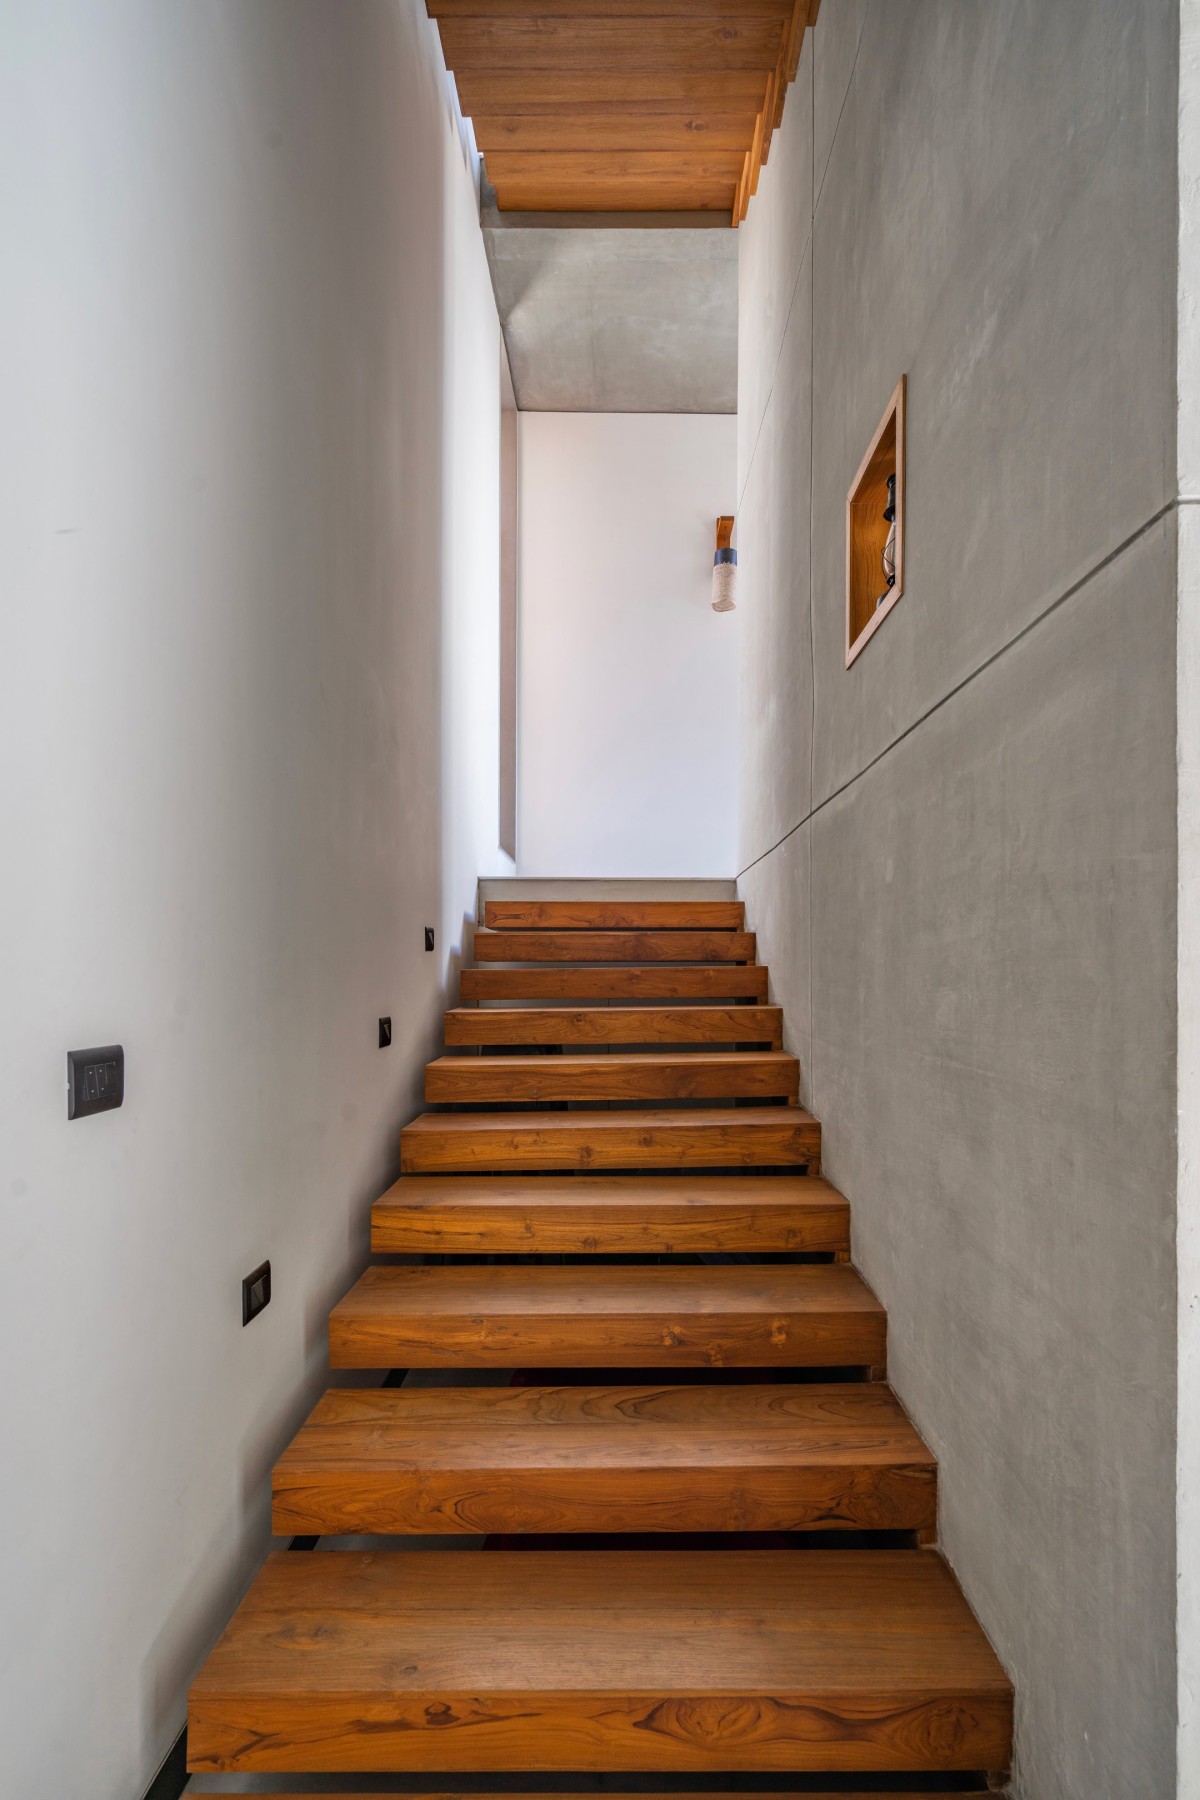 Staircase of An Urban House by MISA Architects